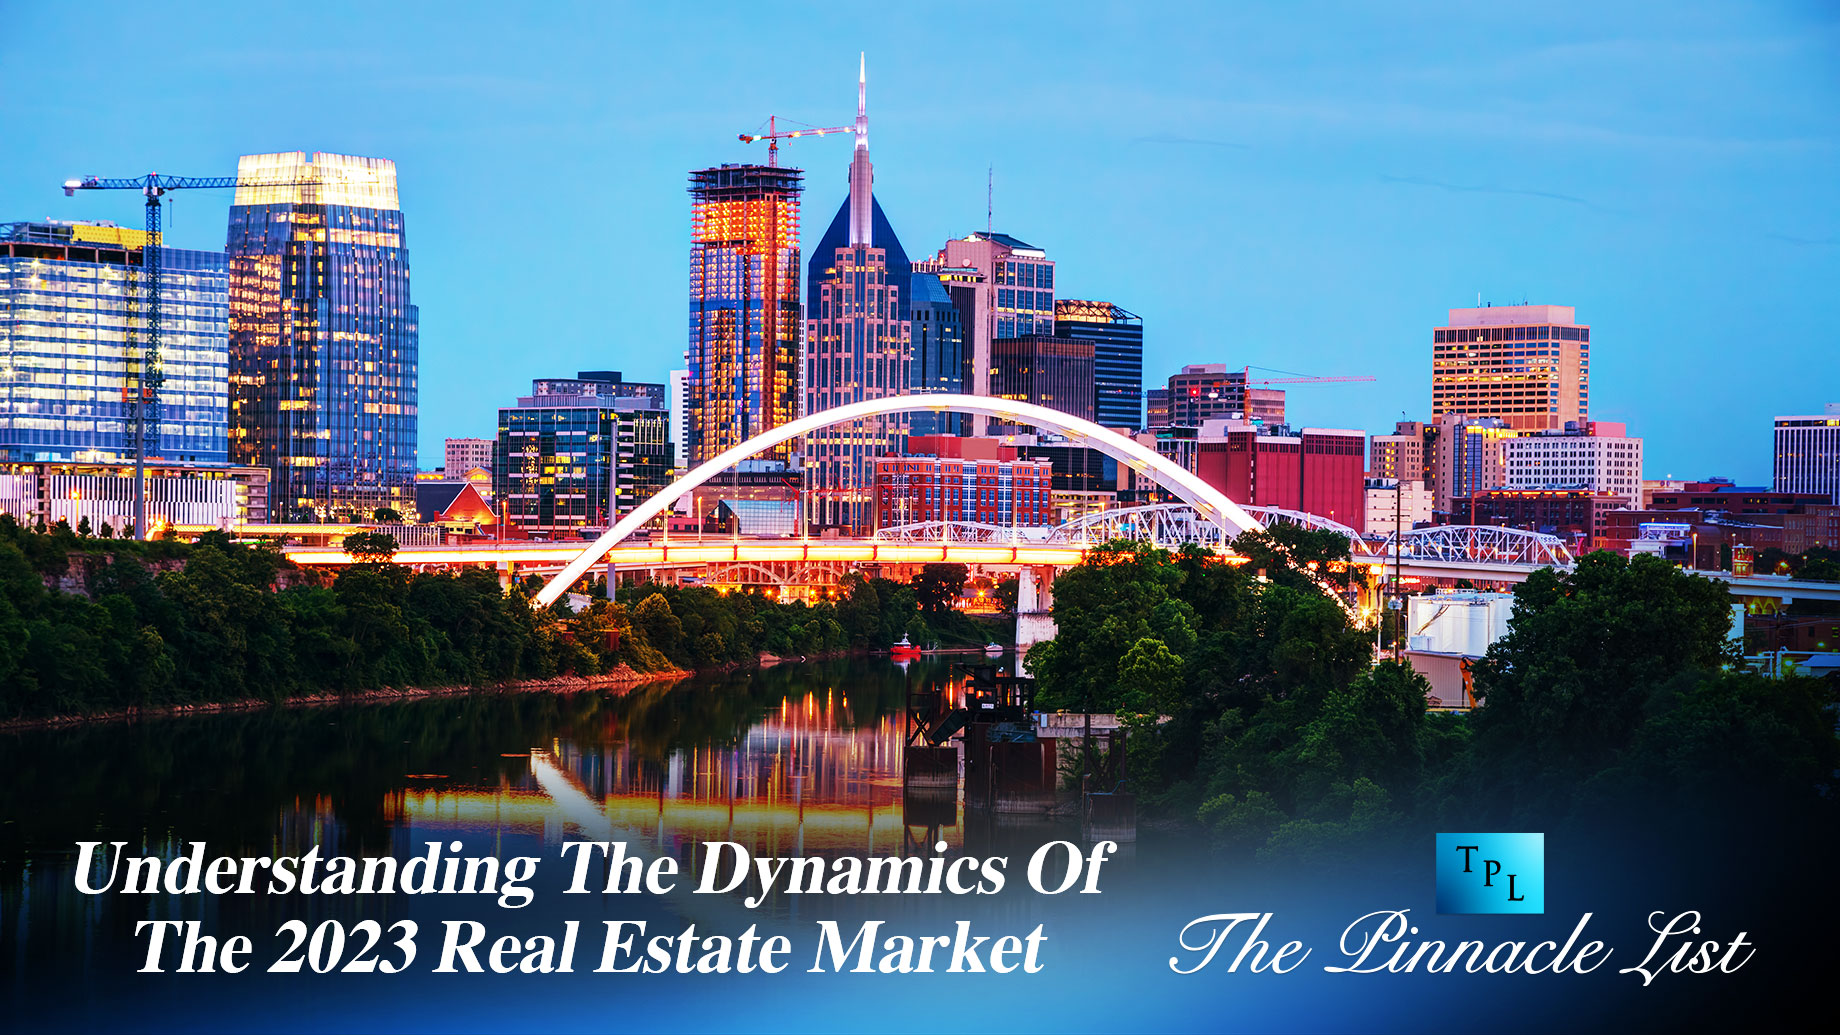 Understanding The Dynamics Of The 2023 Real Estate Market